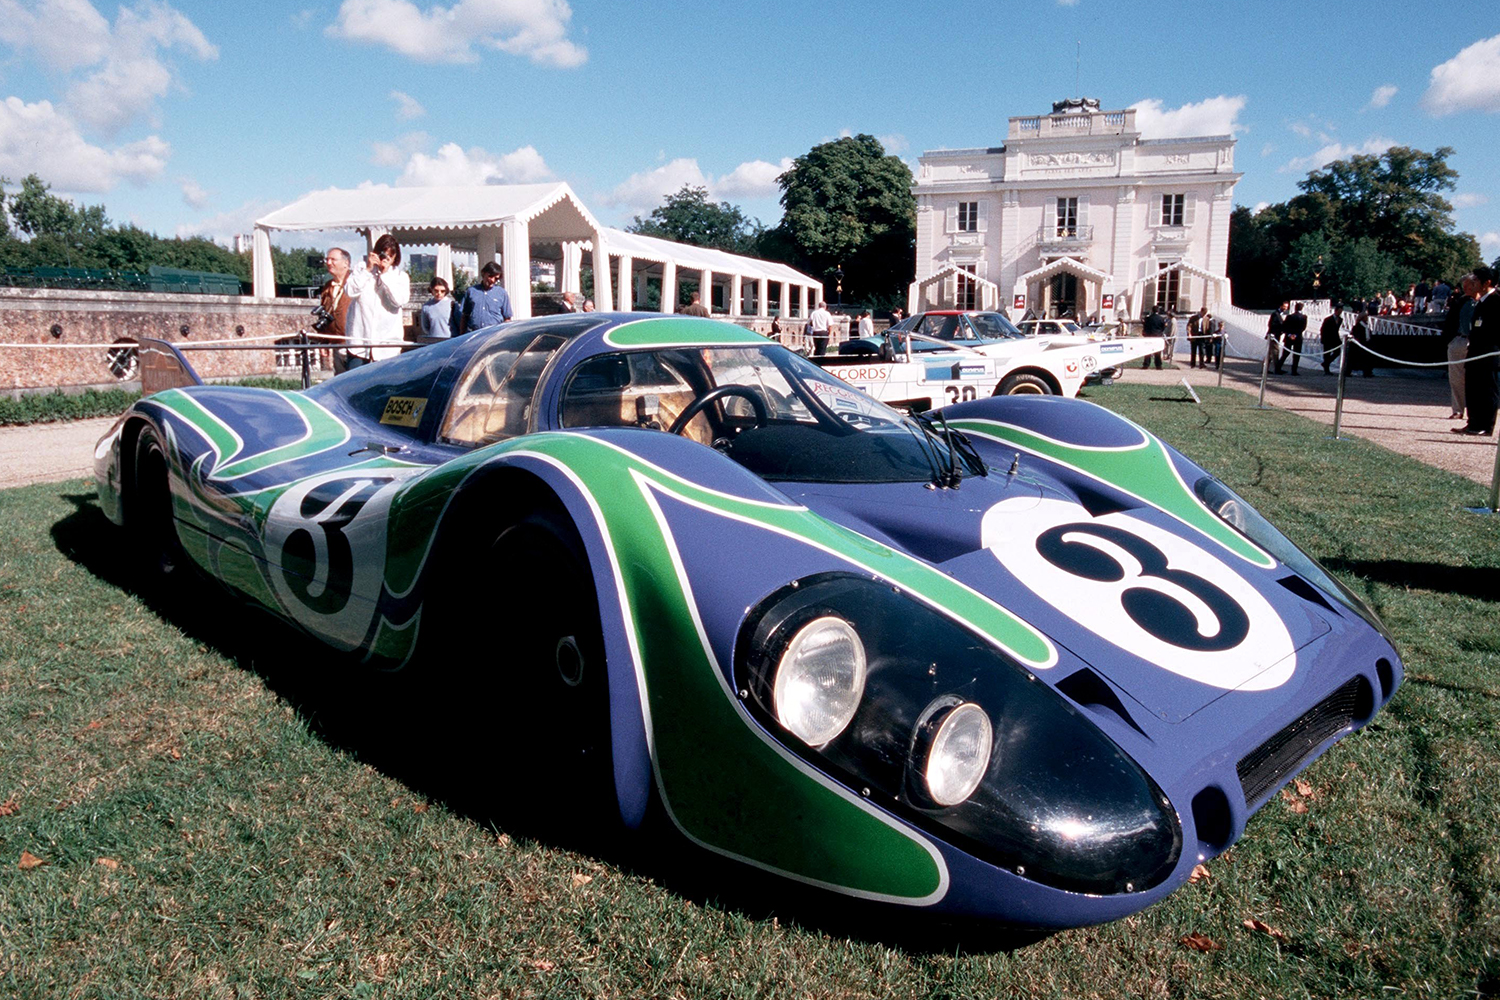 The Porsche 917 with the Hippie livery exhibited at Bagatelle park in France in 2001